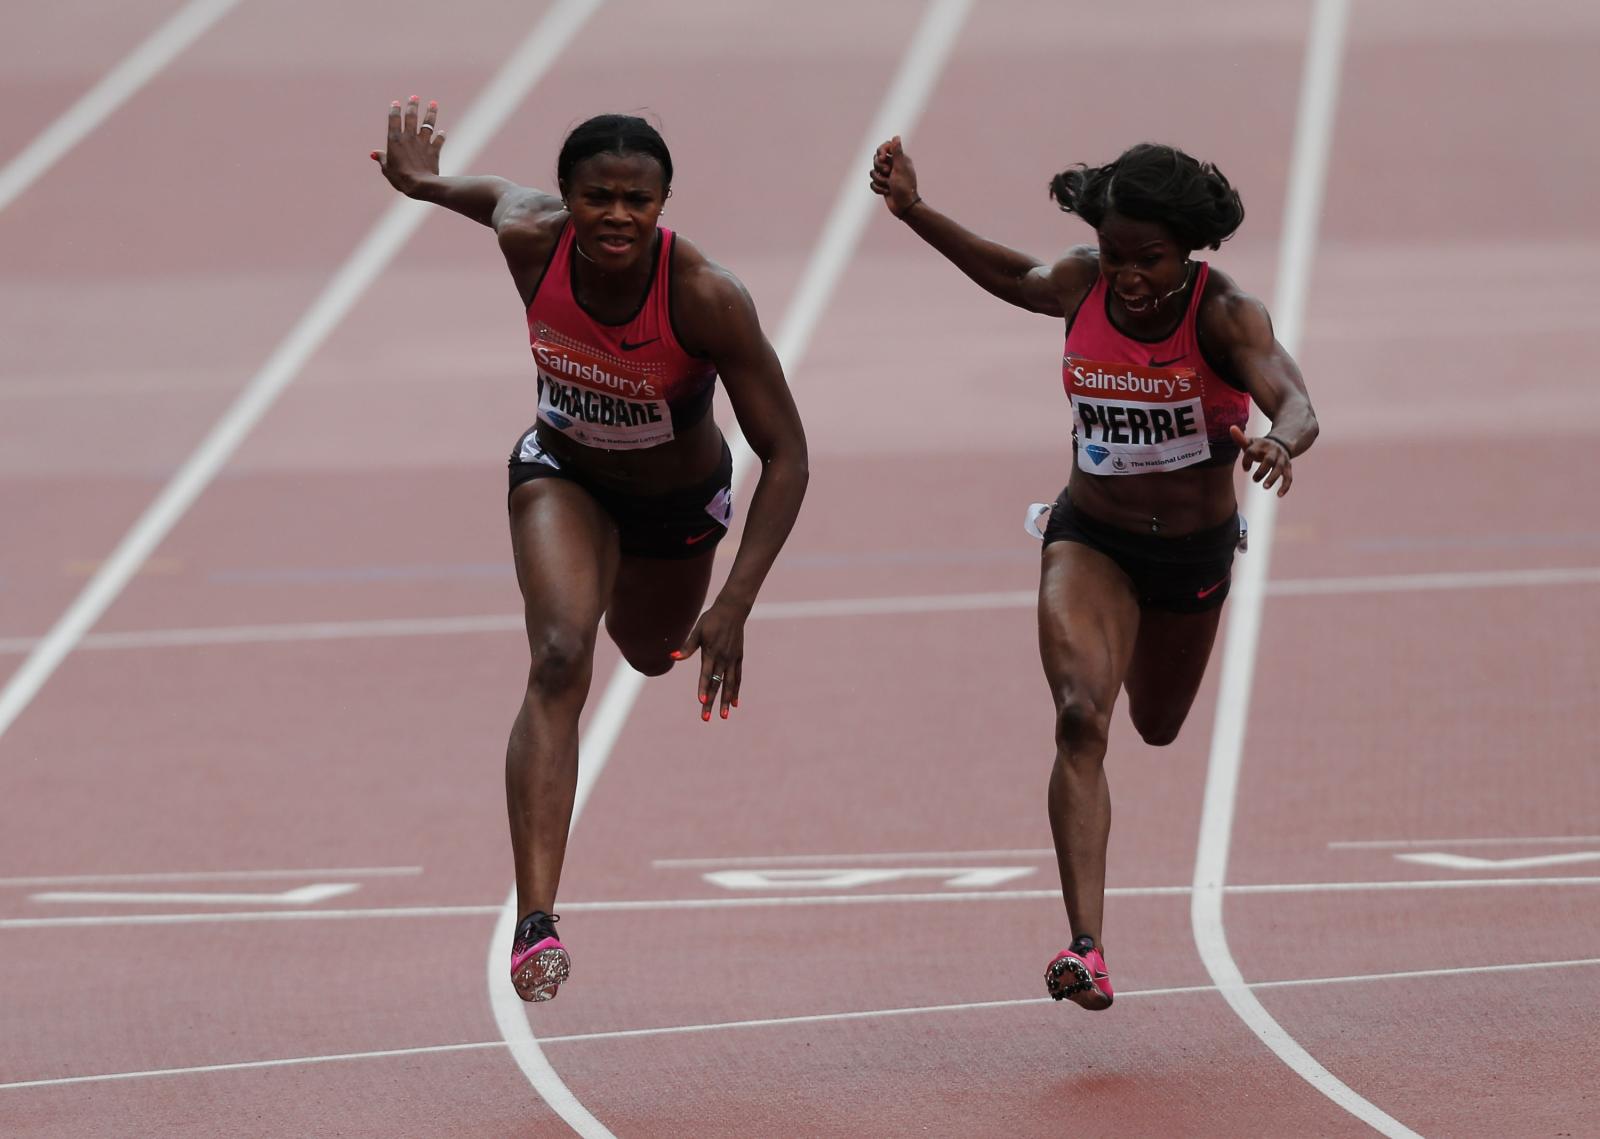 (L-R) Blessing Okagbare of Nigeria crosses the line ahead of Barbara Pierre of the United States in the Women's 100m Final during day two of the Sainsbury's Anniversary Games - IAAF Diamond League 2013 at The Queen Elizabeth Olympic Park on July 27, 2013 in London, England. (Photo by Harry Engels/Getty Images)